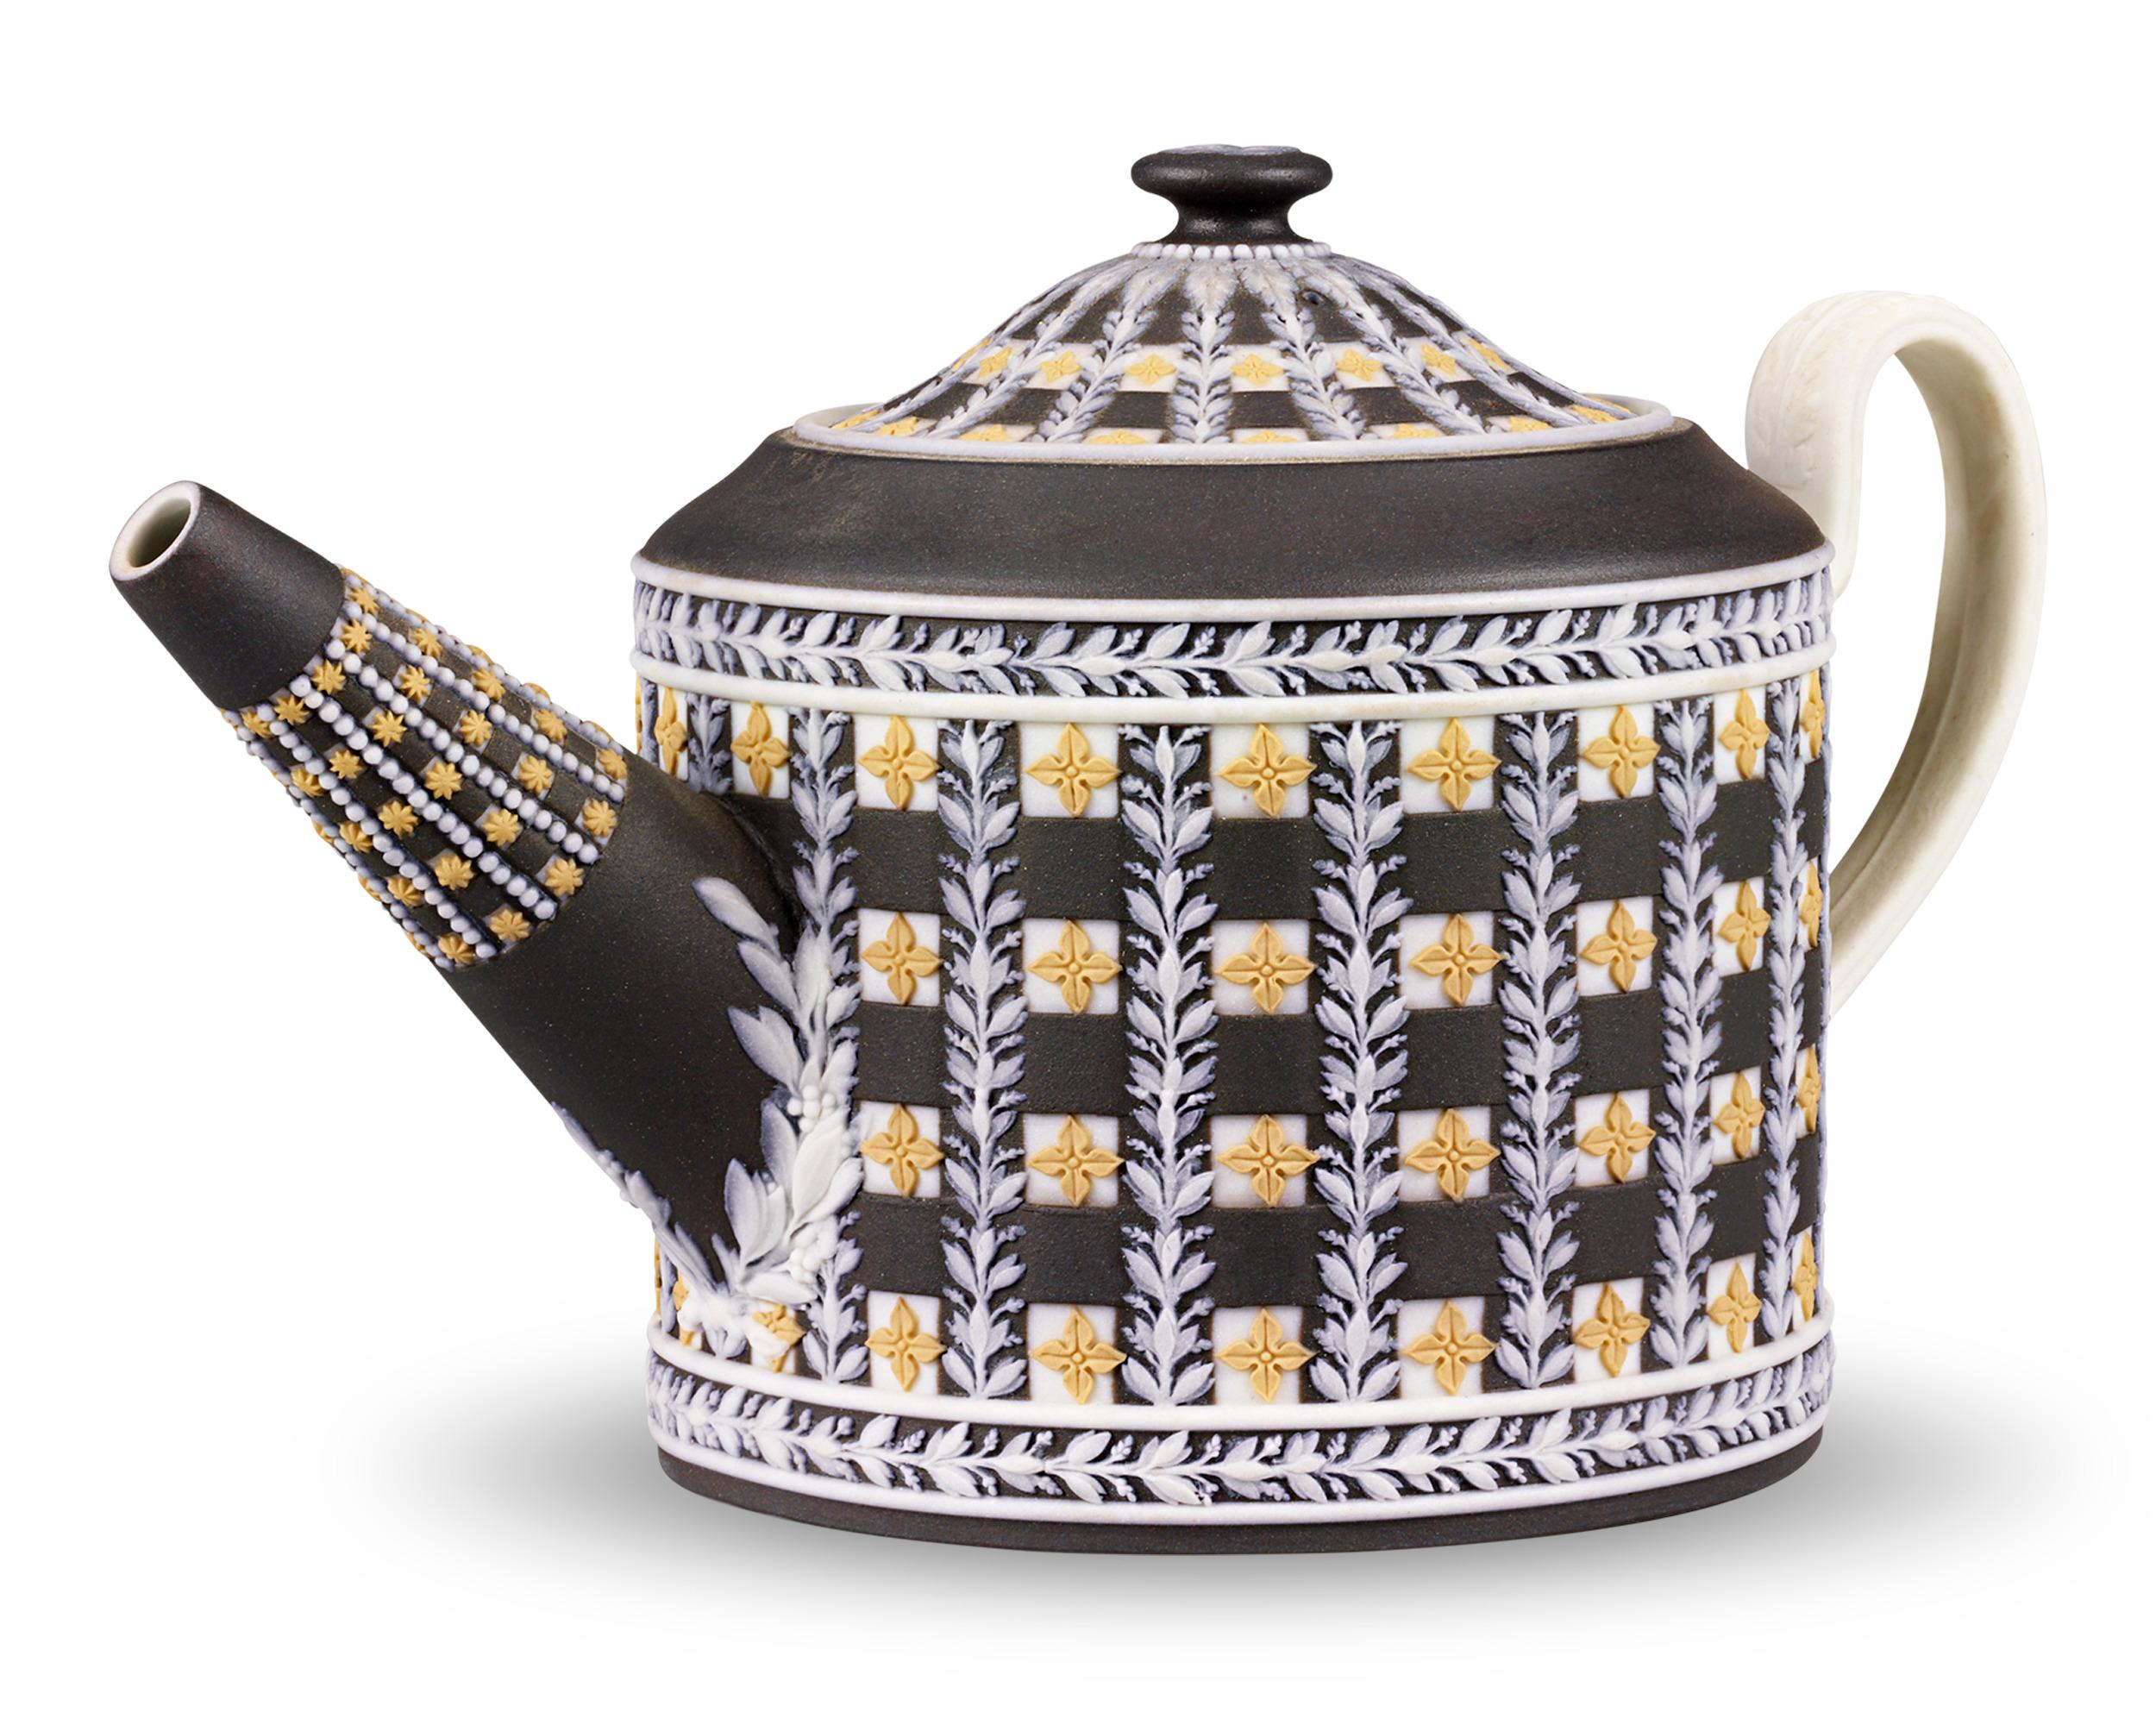 Crafted by Wedgwood, this exceptional three-piece tea set includes a teapot, creamer and lidded sugar bowl. The set features the famed English porcelain firm’s highly desirable and rare diceware motif. Golden yellow quatrefoil stars against white